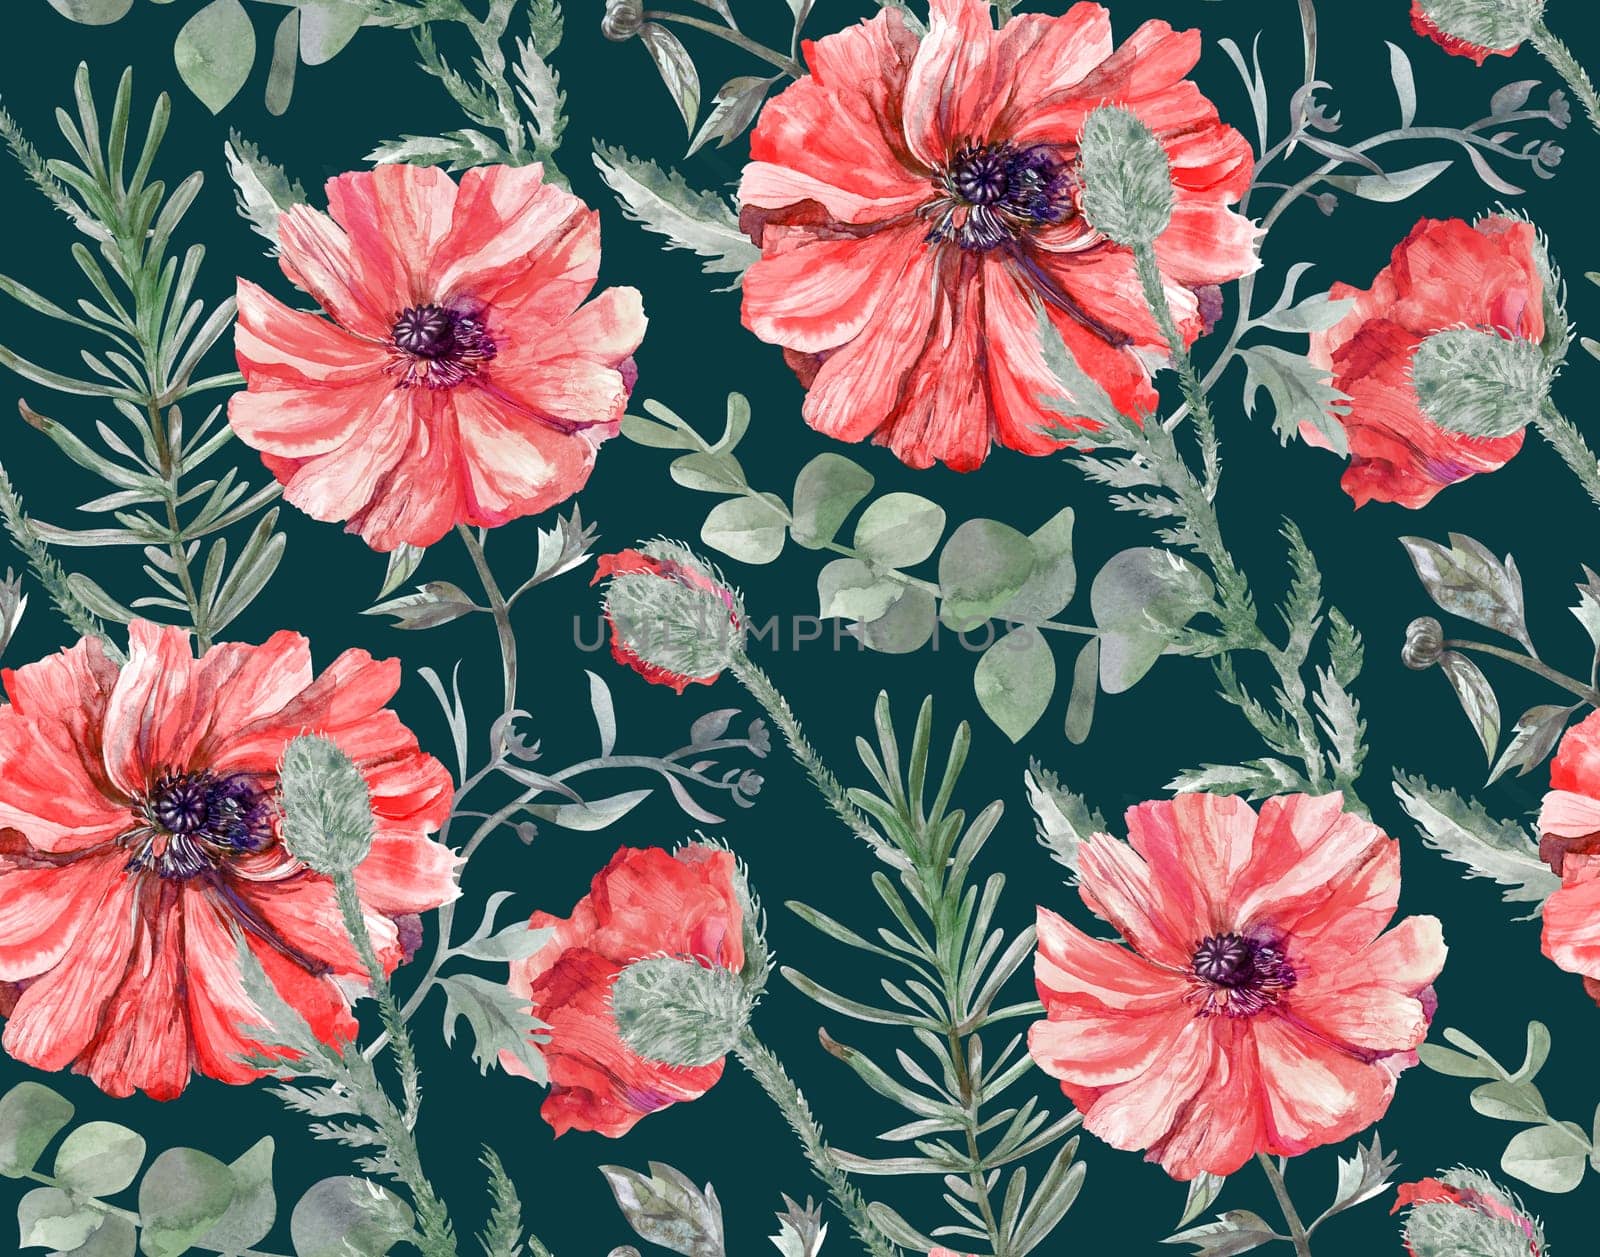 Seamless watercolor pattern with red poppy flowers and eucalyptus leaves on green background for summer design of textiles and surfaces